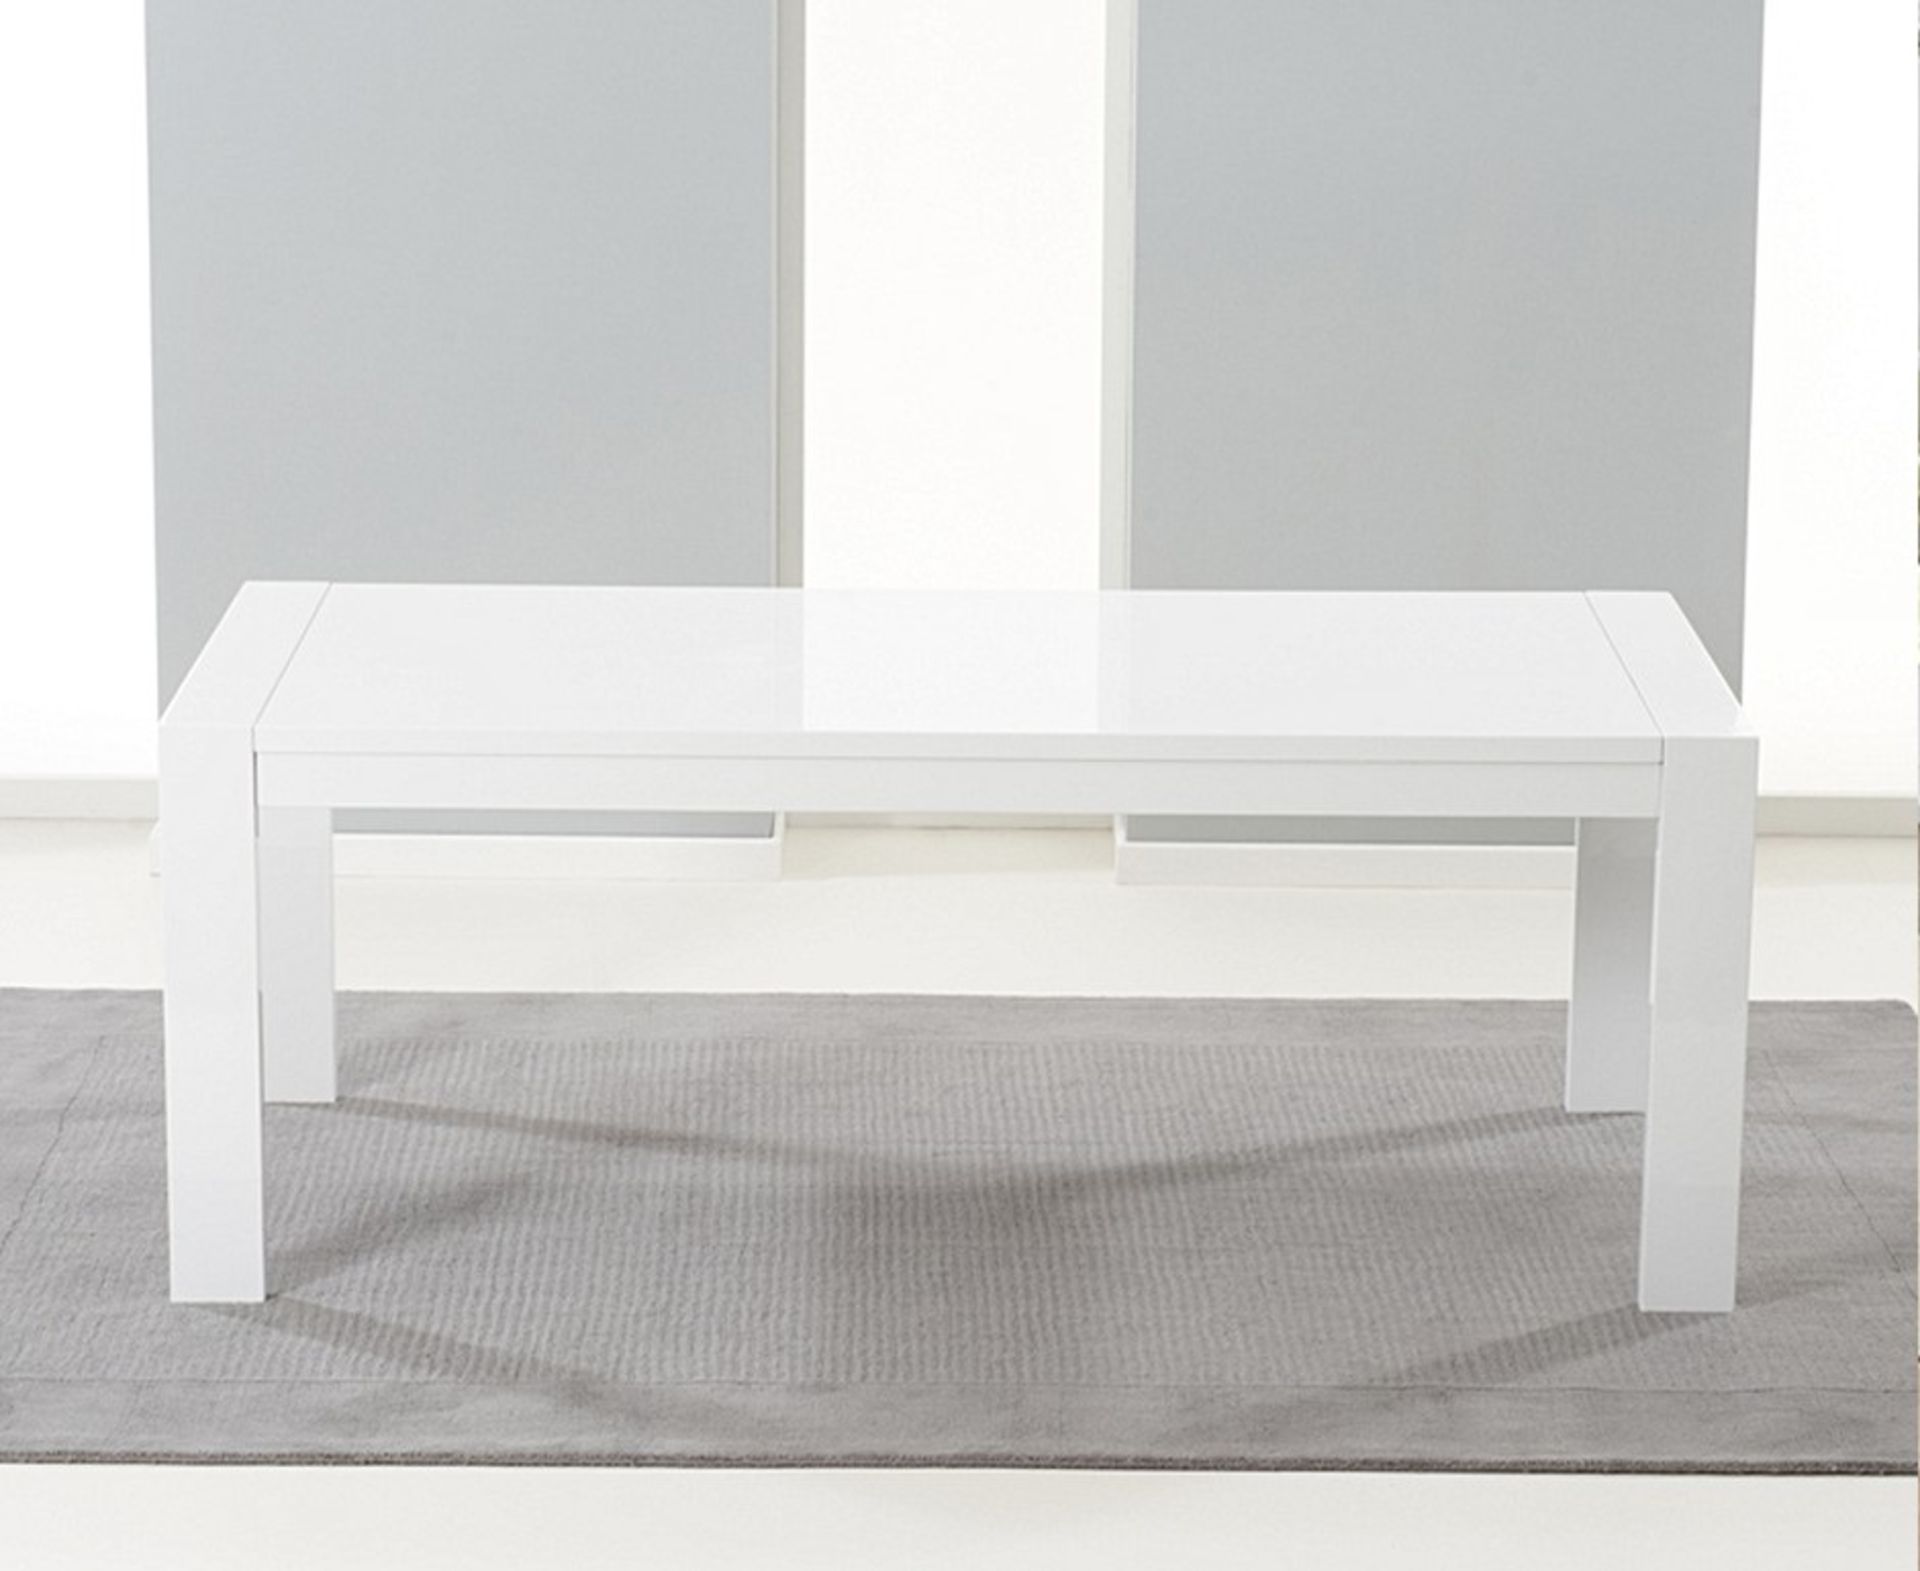 Venice 200cm White High Gloss Extending Dining Table White, simple and sophisticated, the Venice